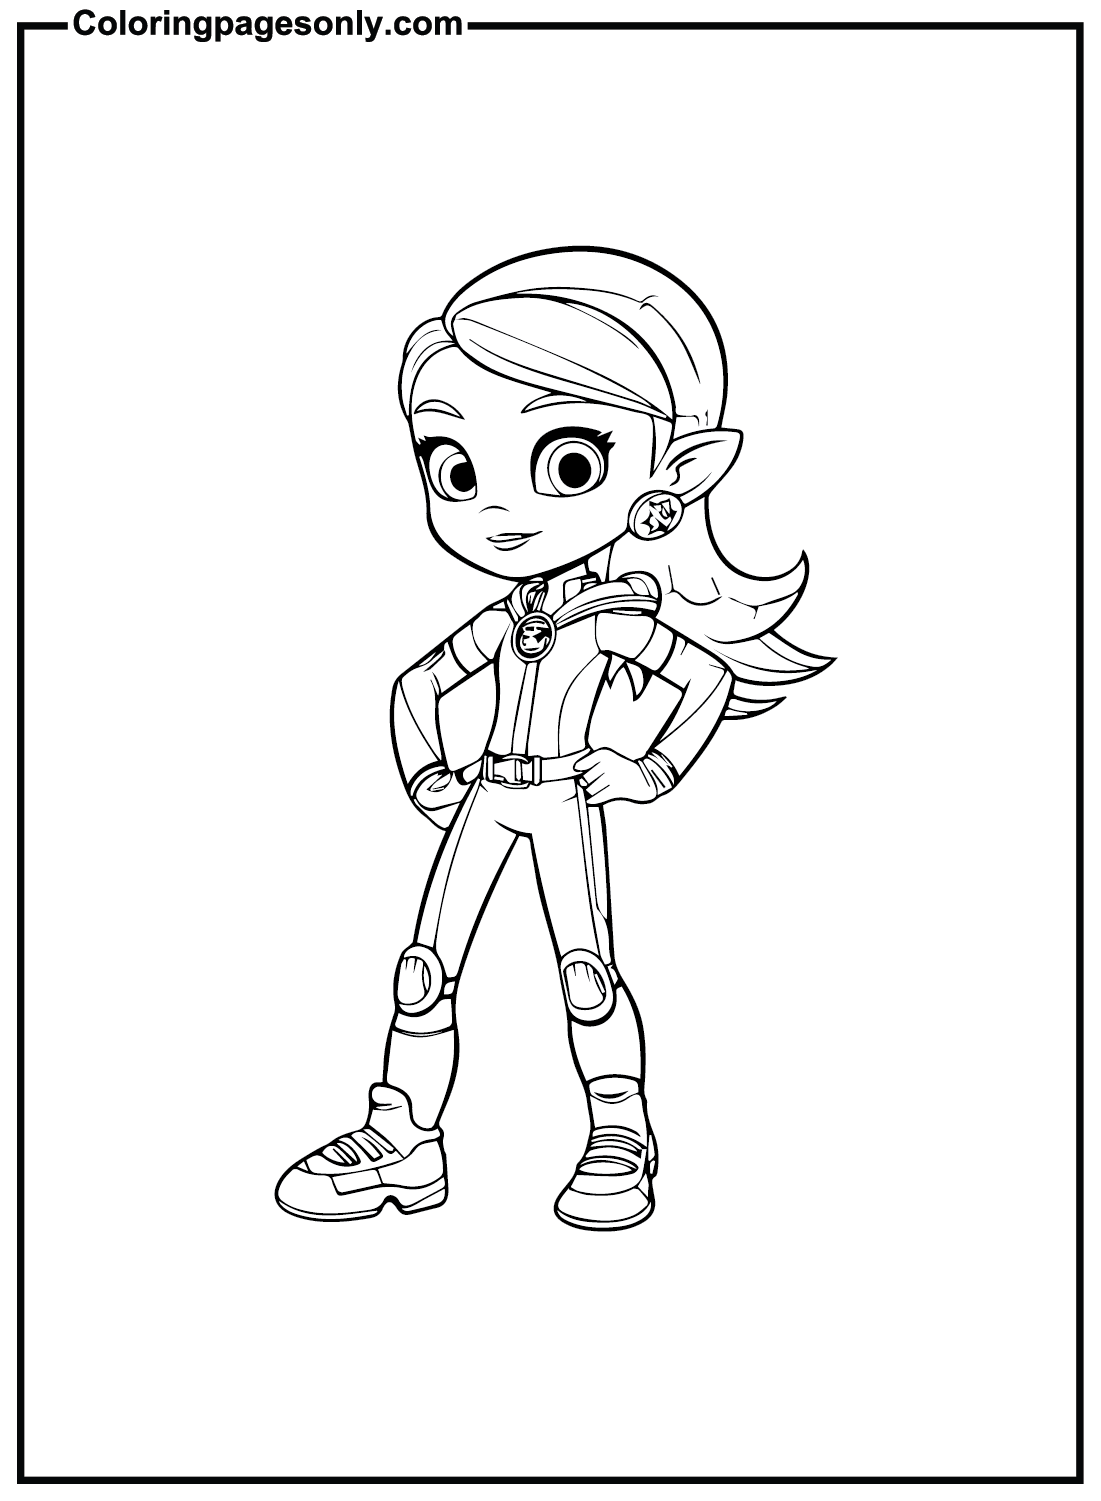 Rainbow Rangers Images To Print Coloring Pages